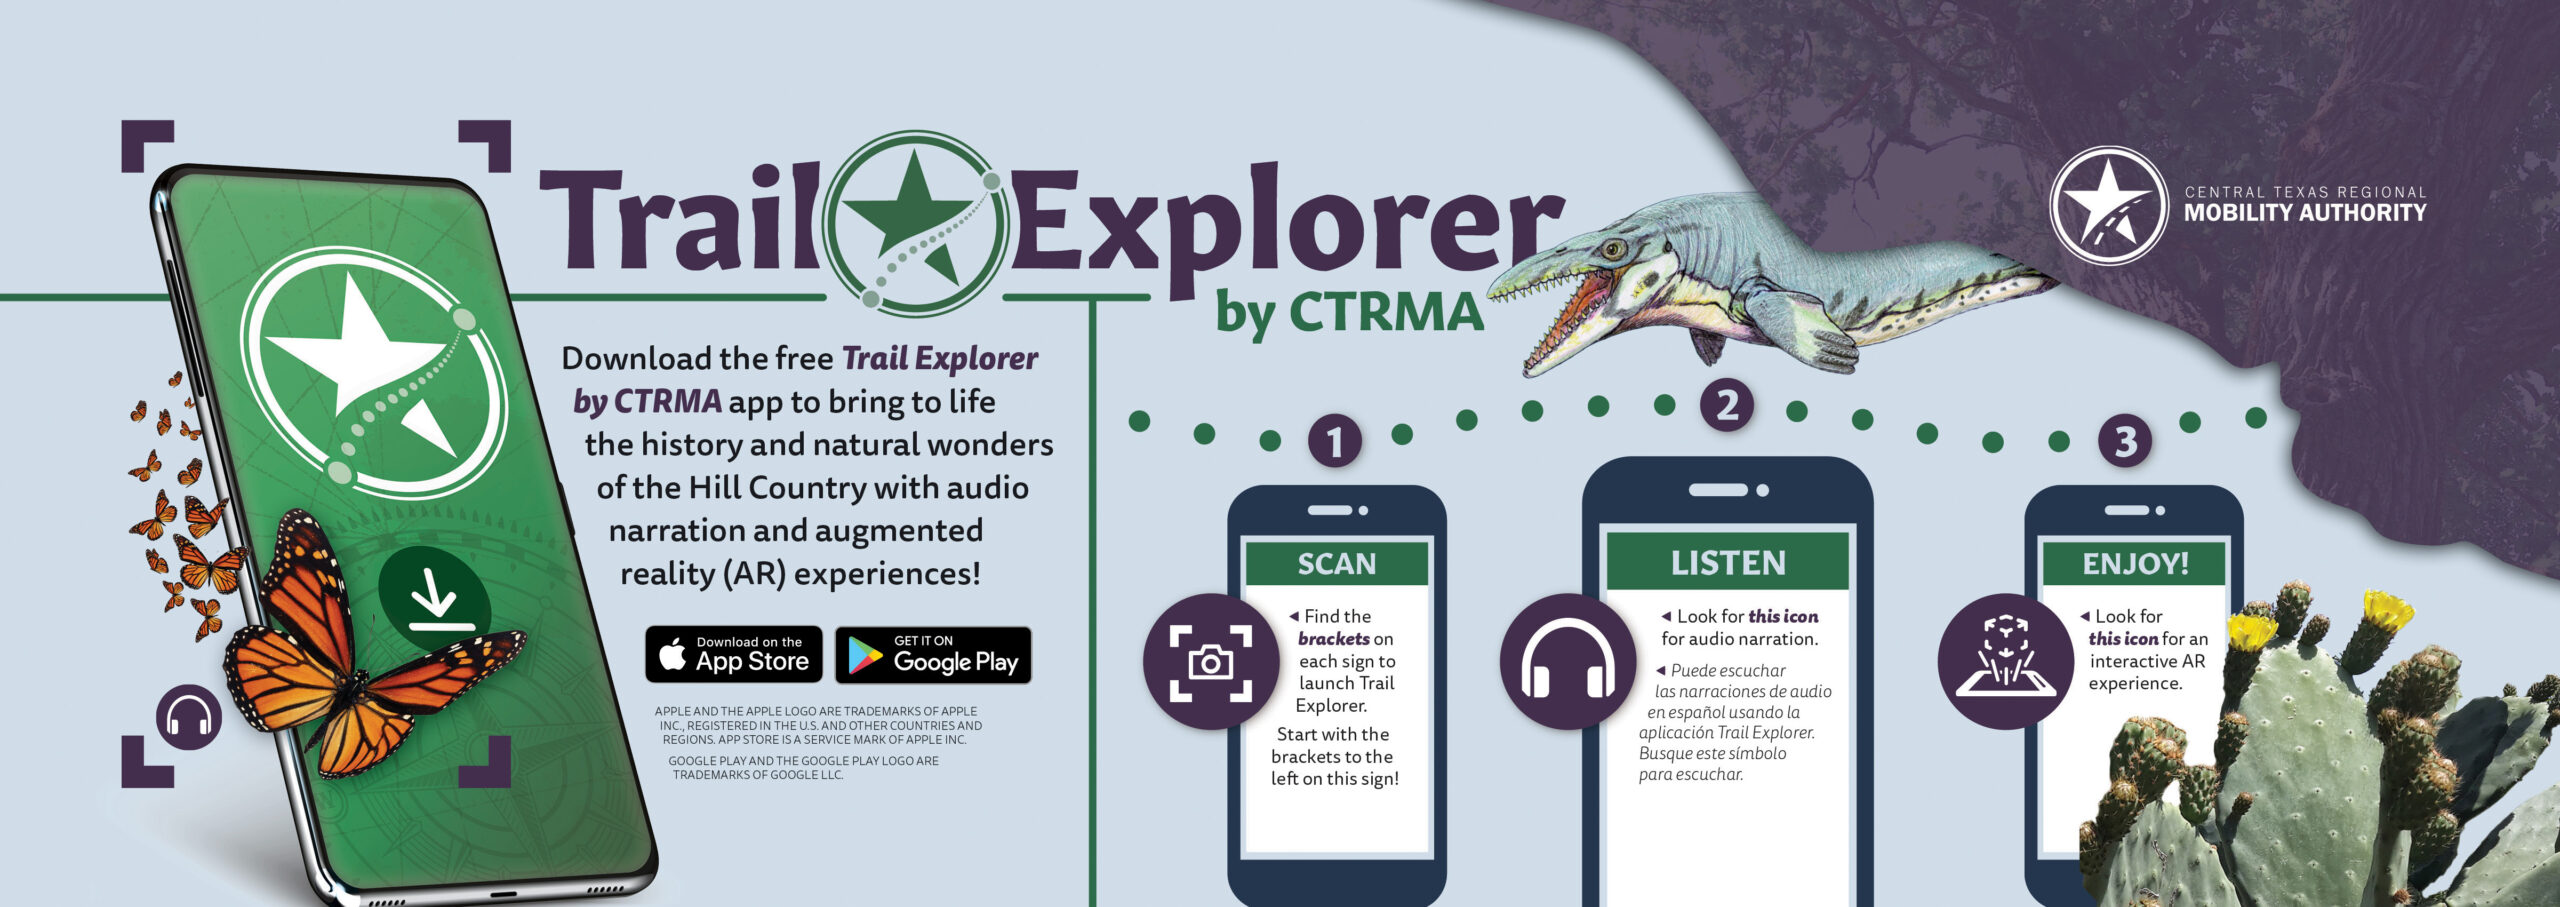 Graphic depicting the Trail Explorer app and features